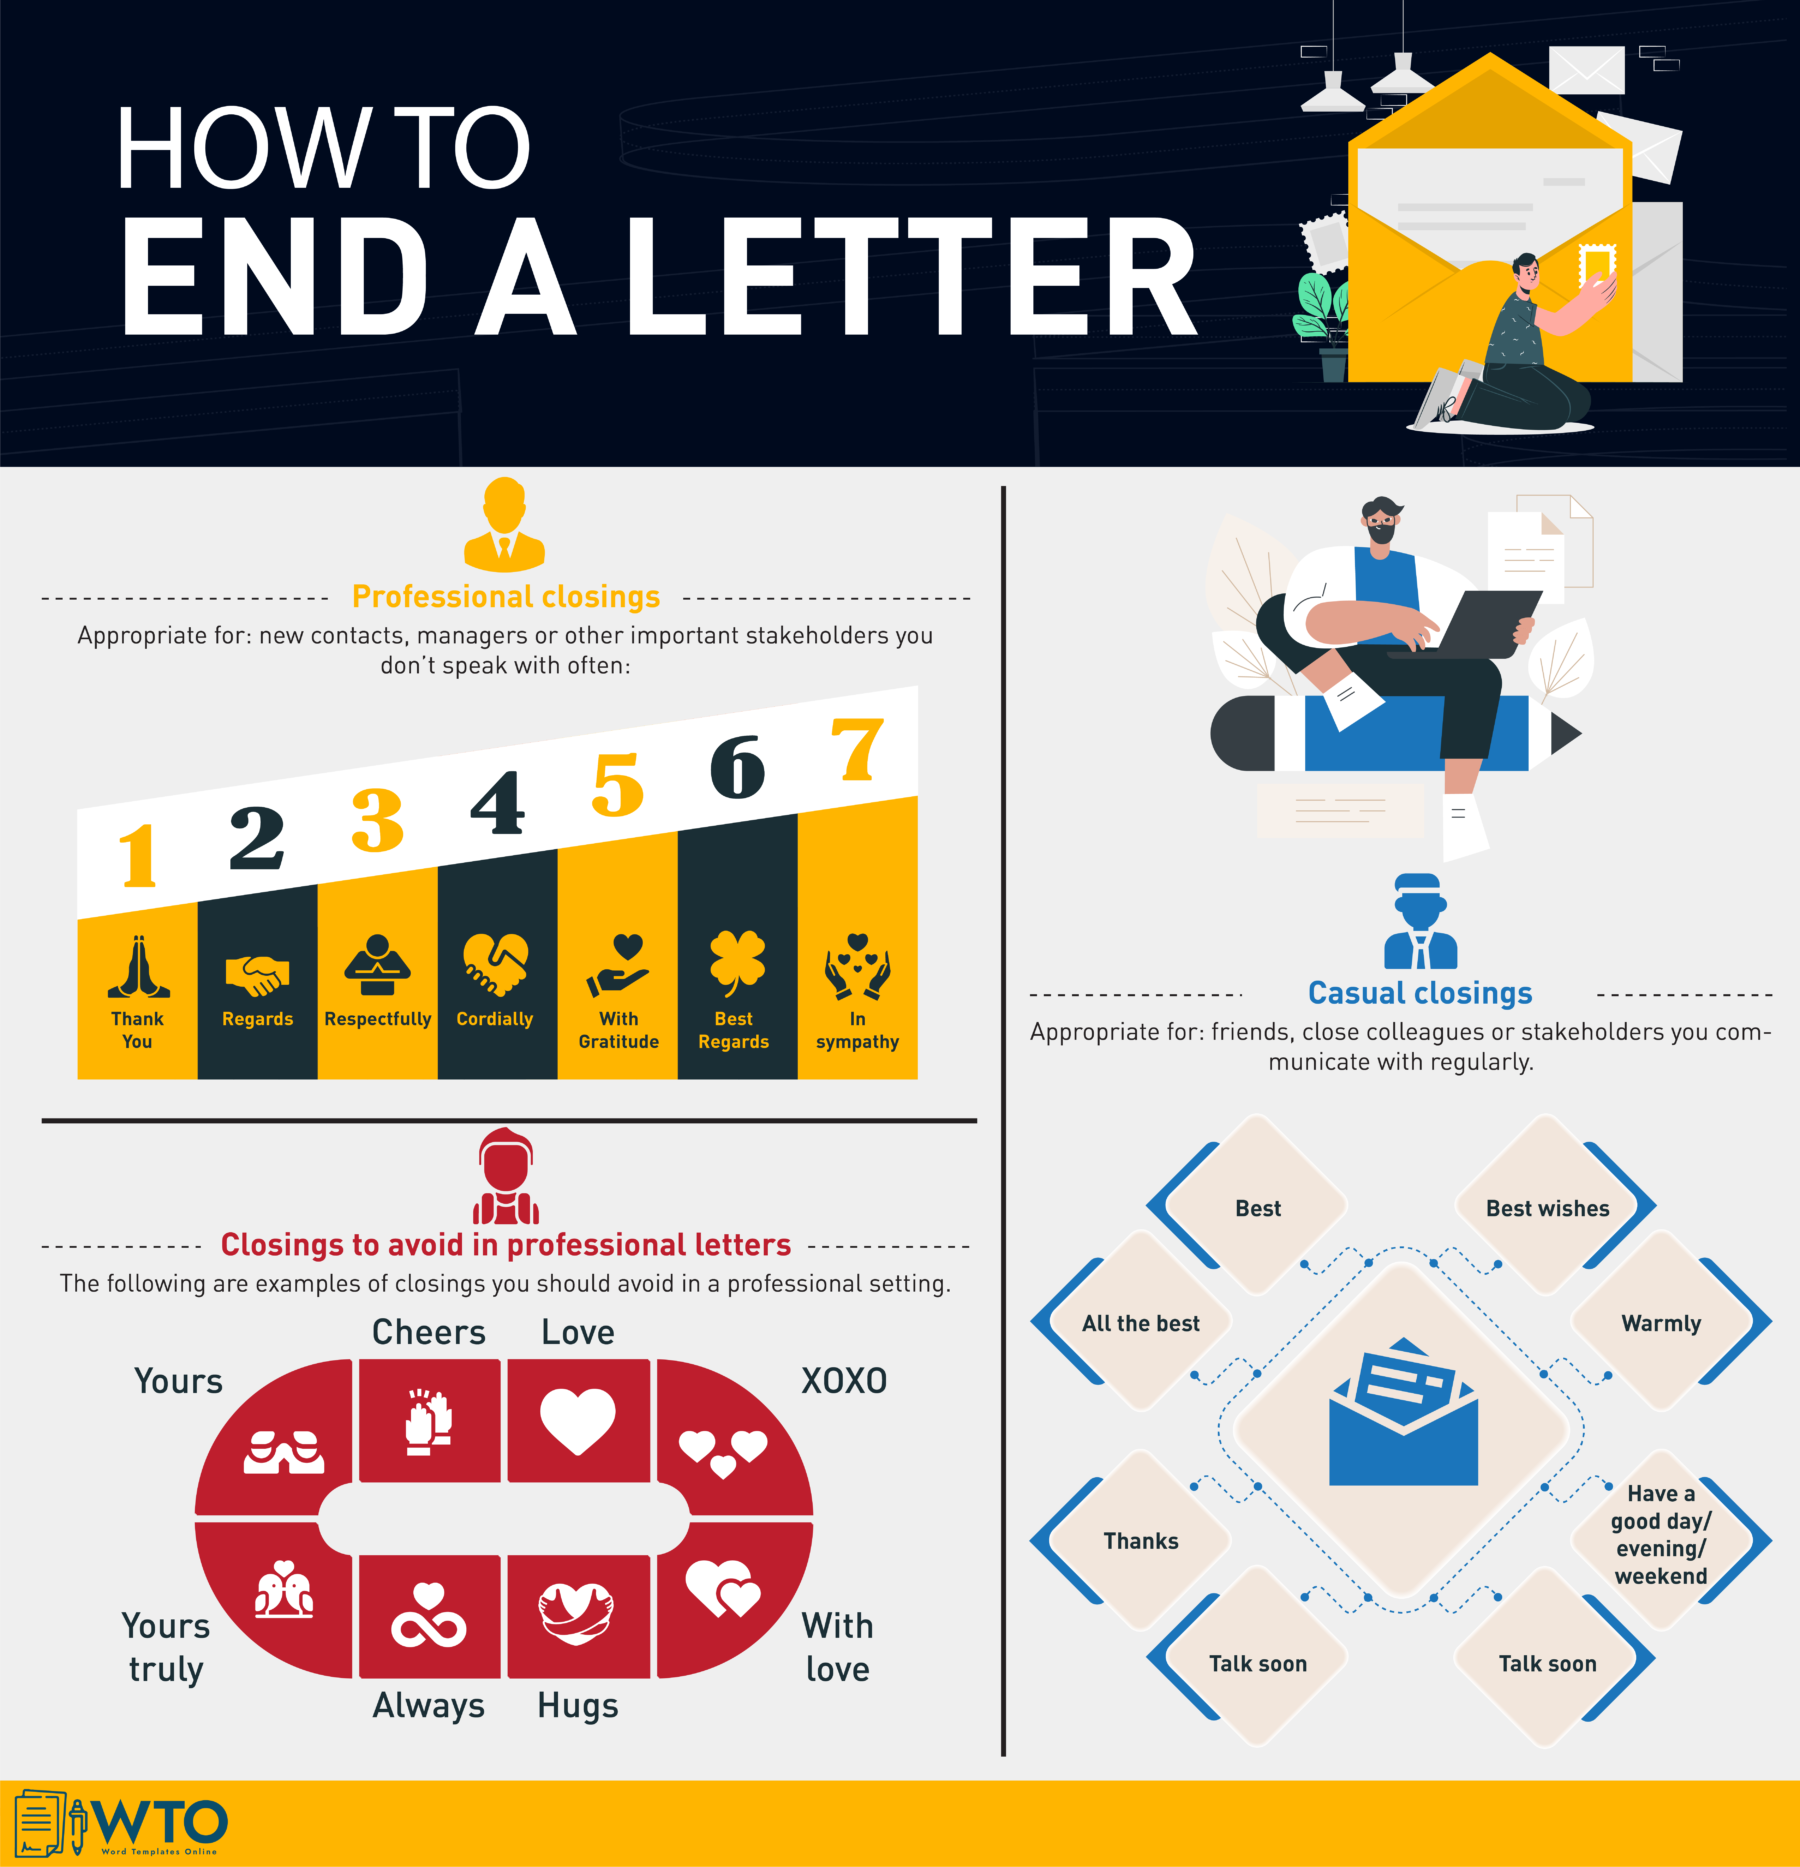 How to End a Letter Infographic